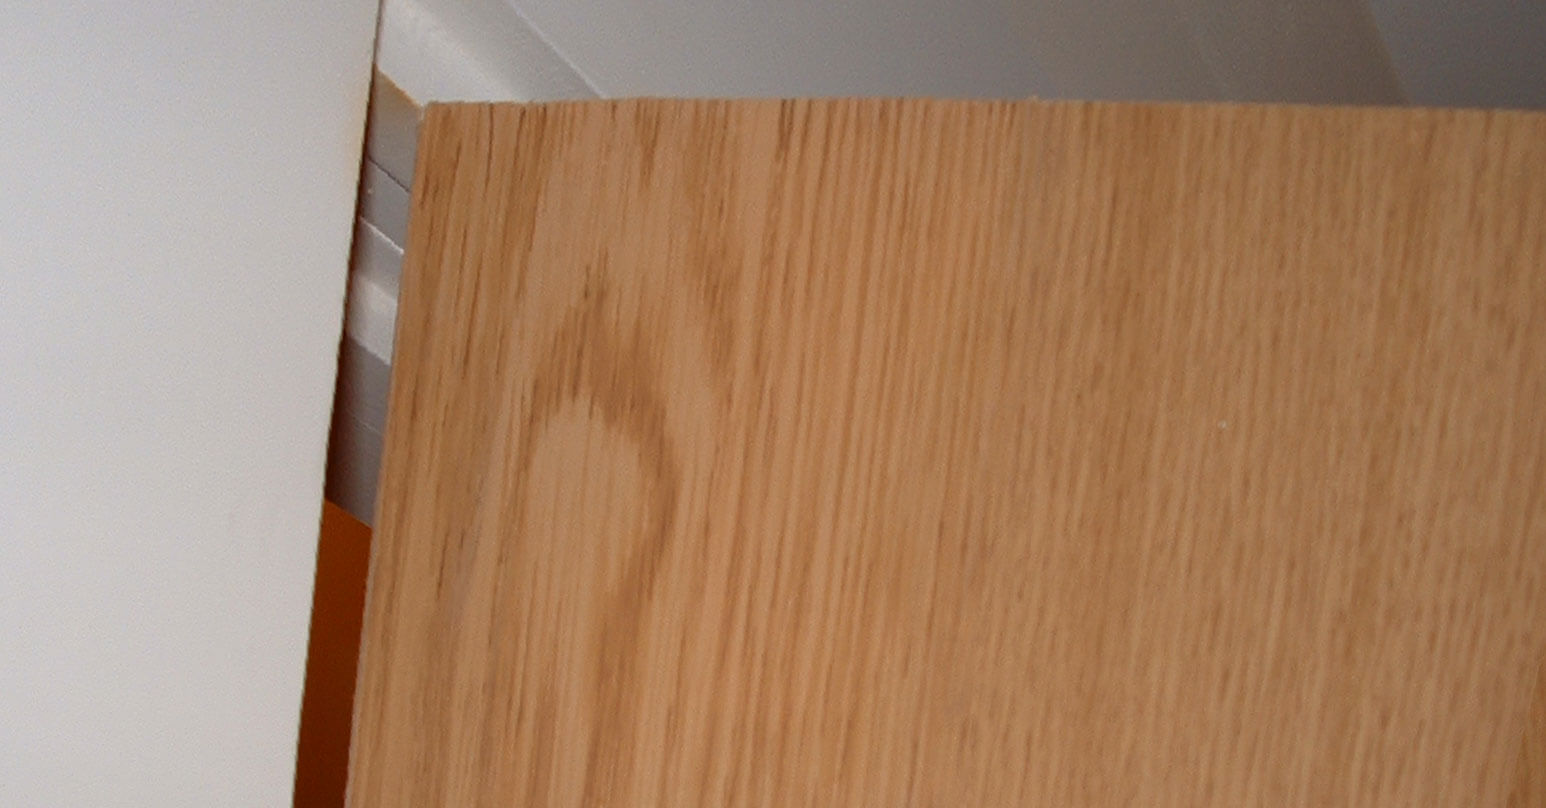 Badly chipped laminate door - After repair